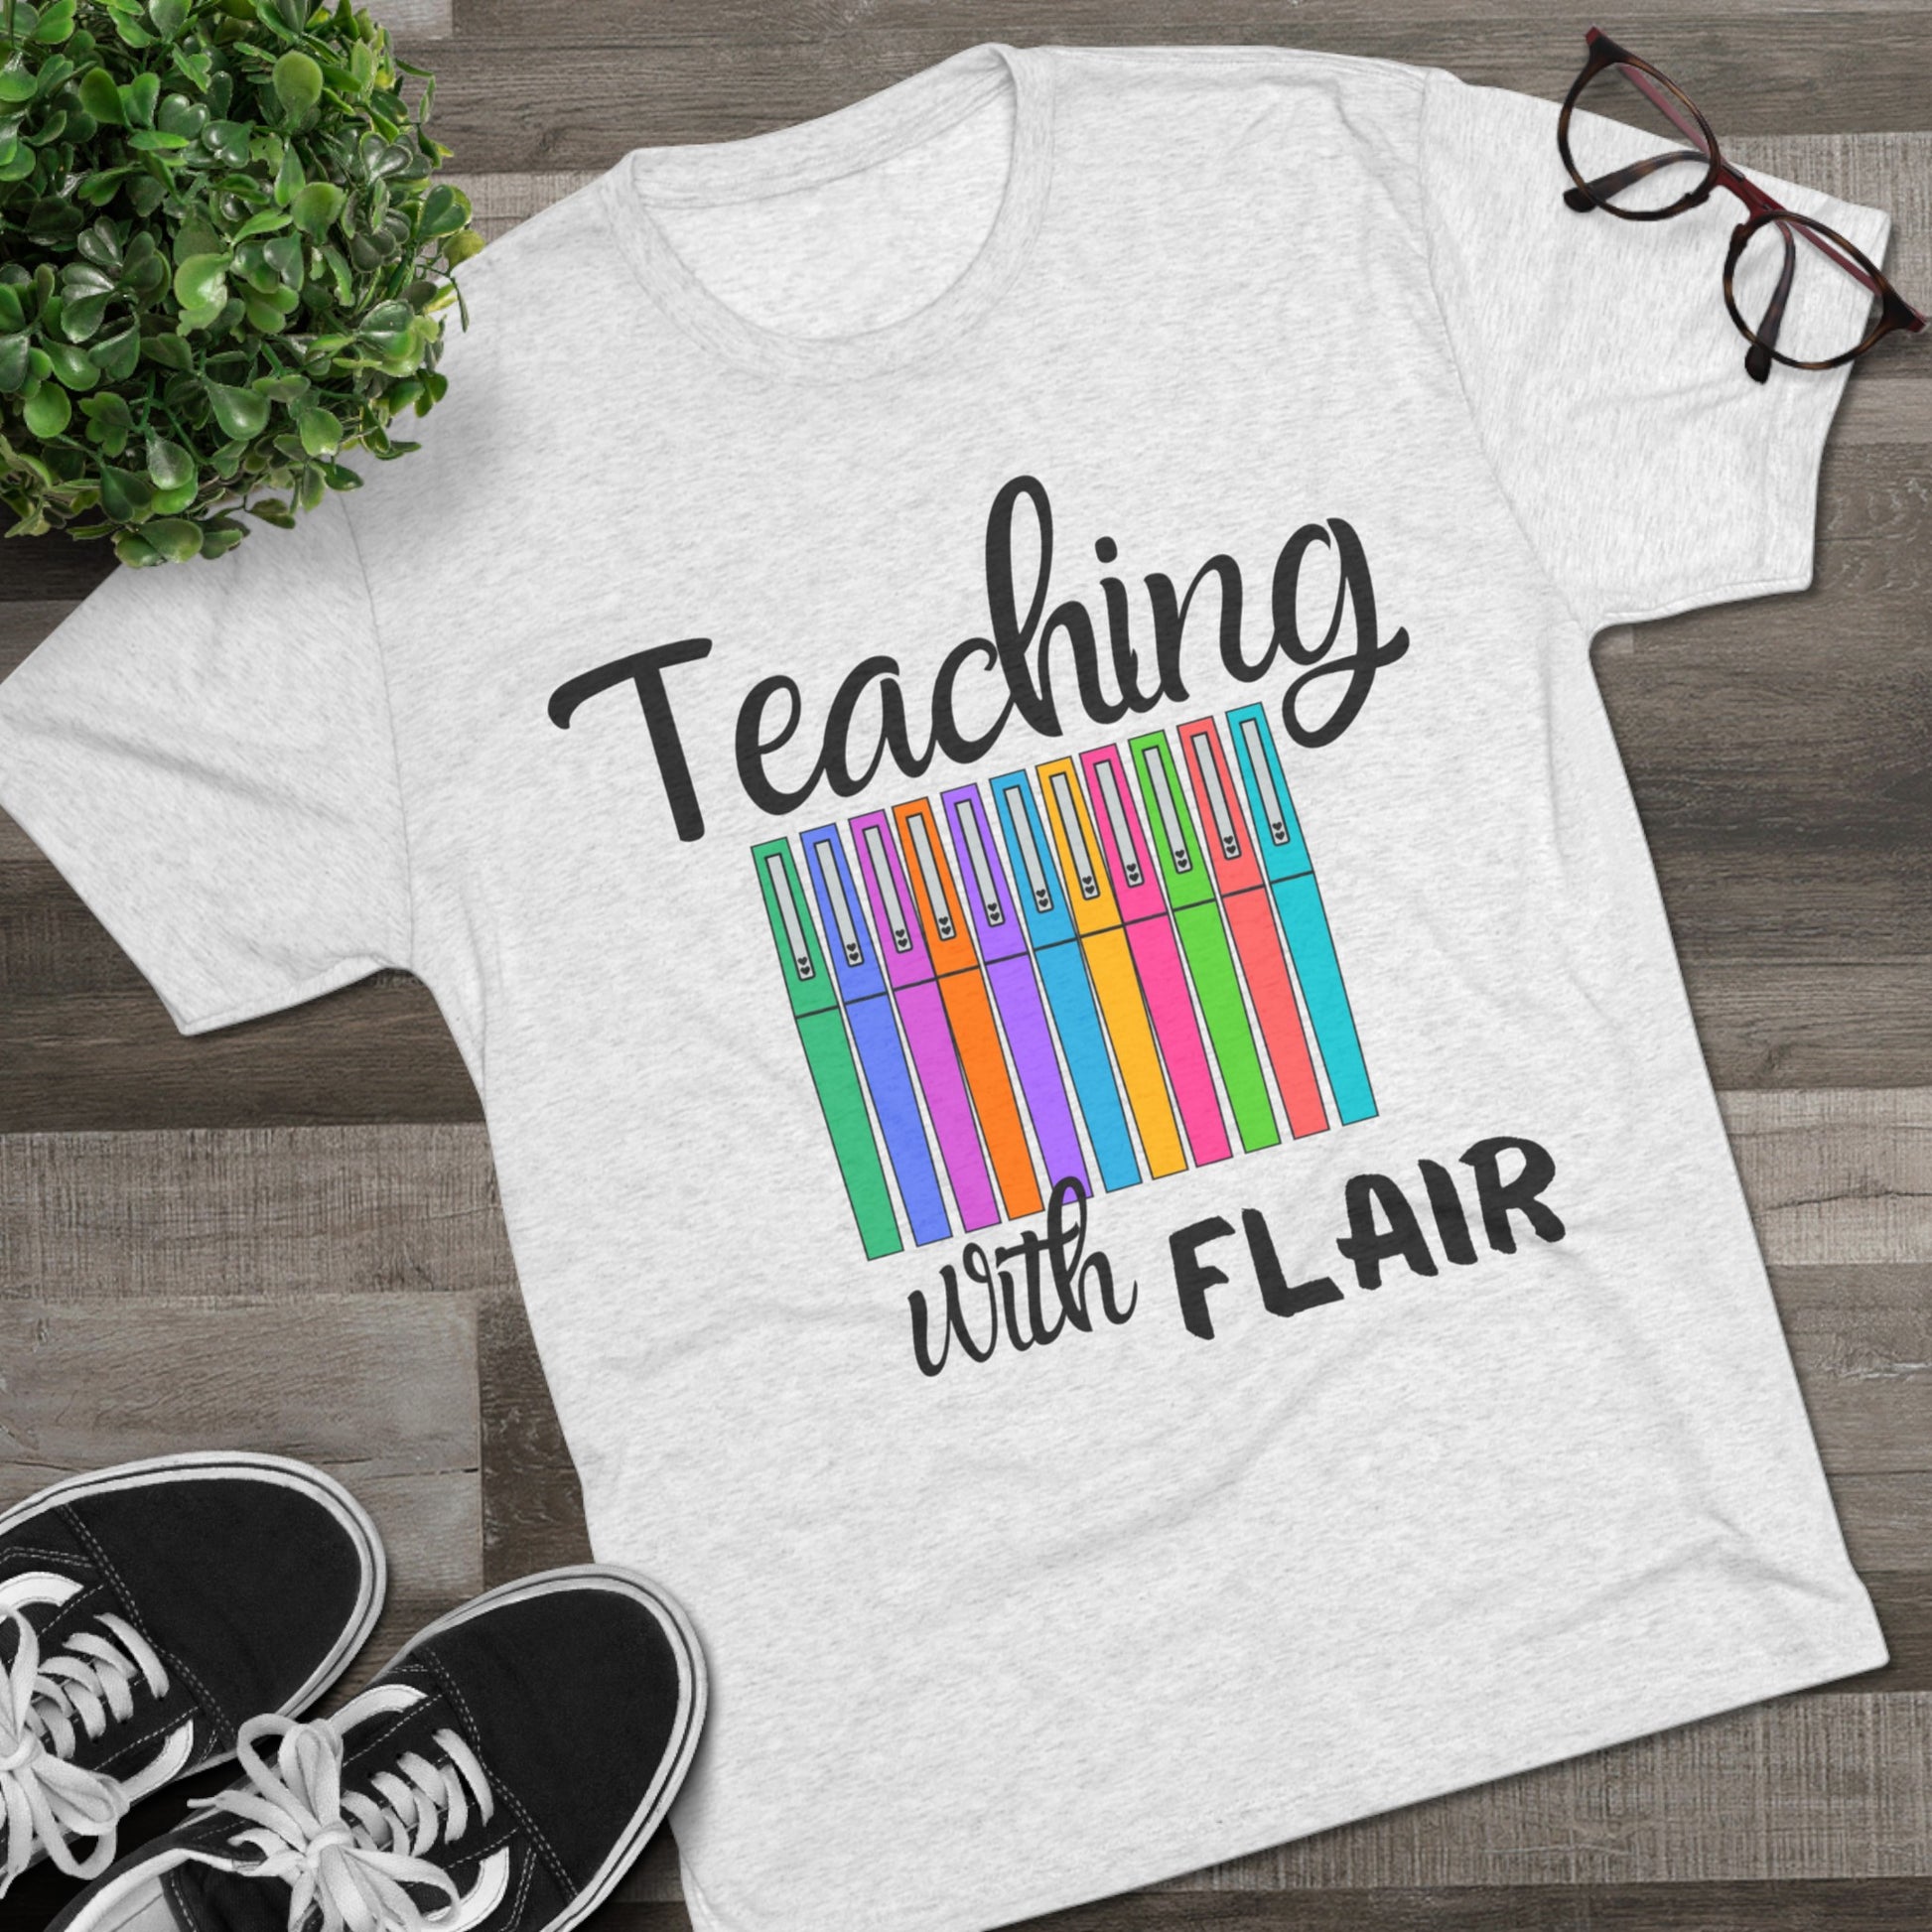 Get trendy with Teaching with Flair Tri-Blend Crew Tee - T-Shirt available at Good Gift Company. Grab yours for $22.55 today!